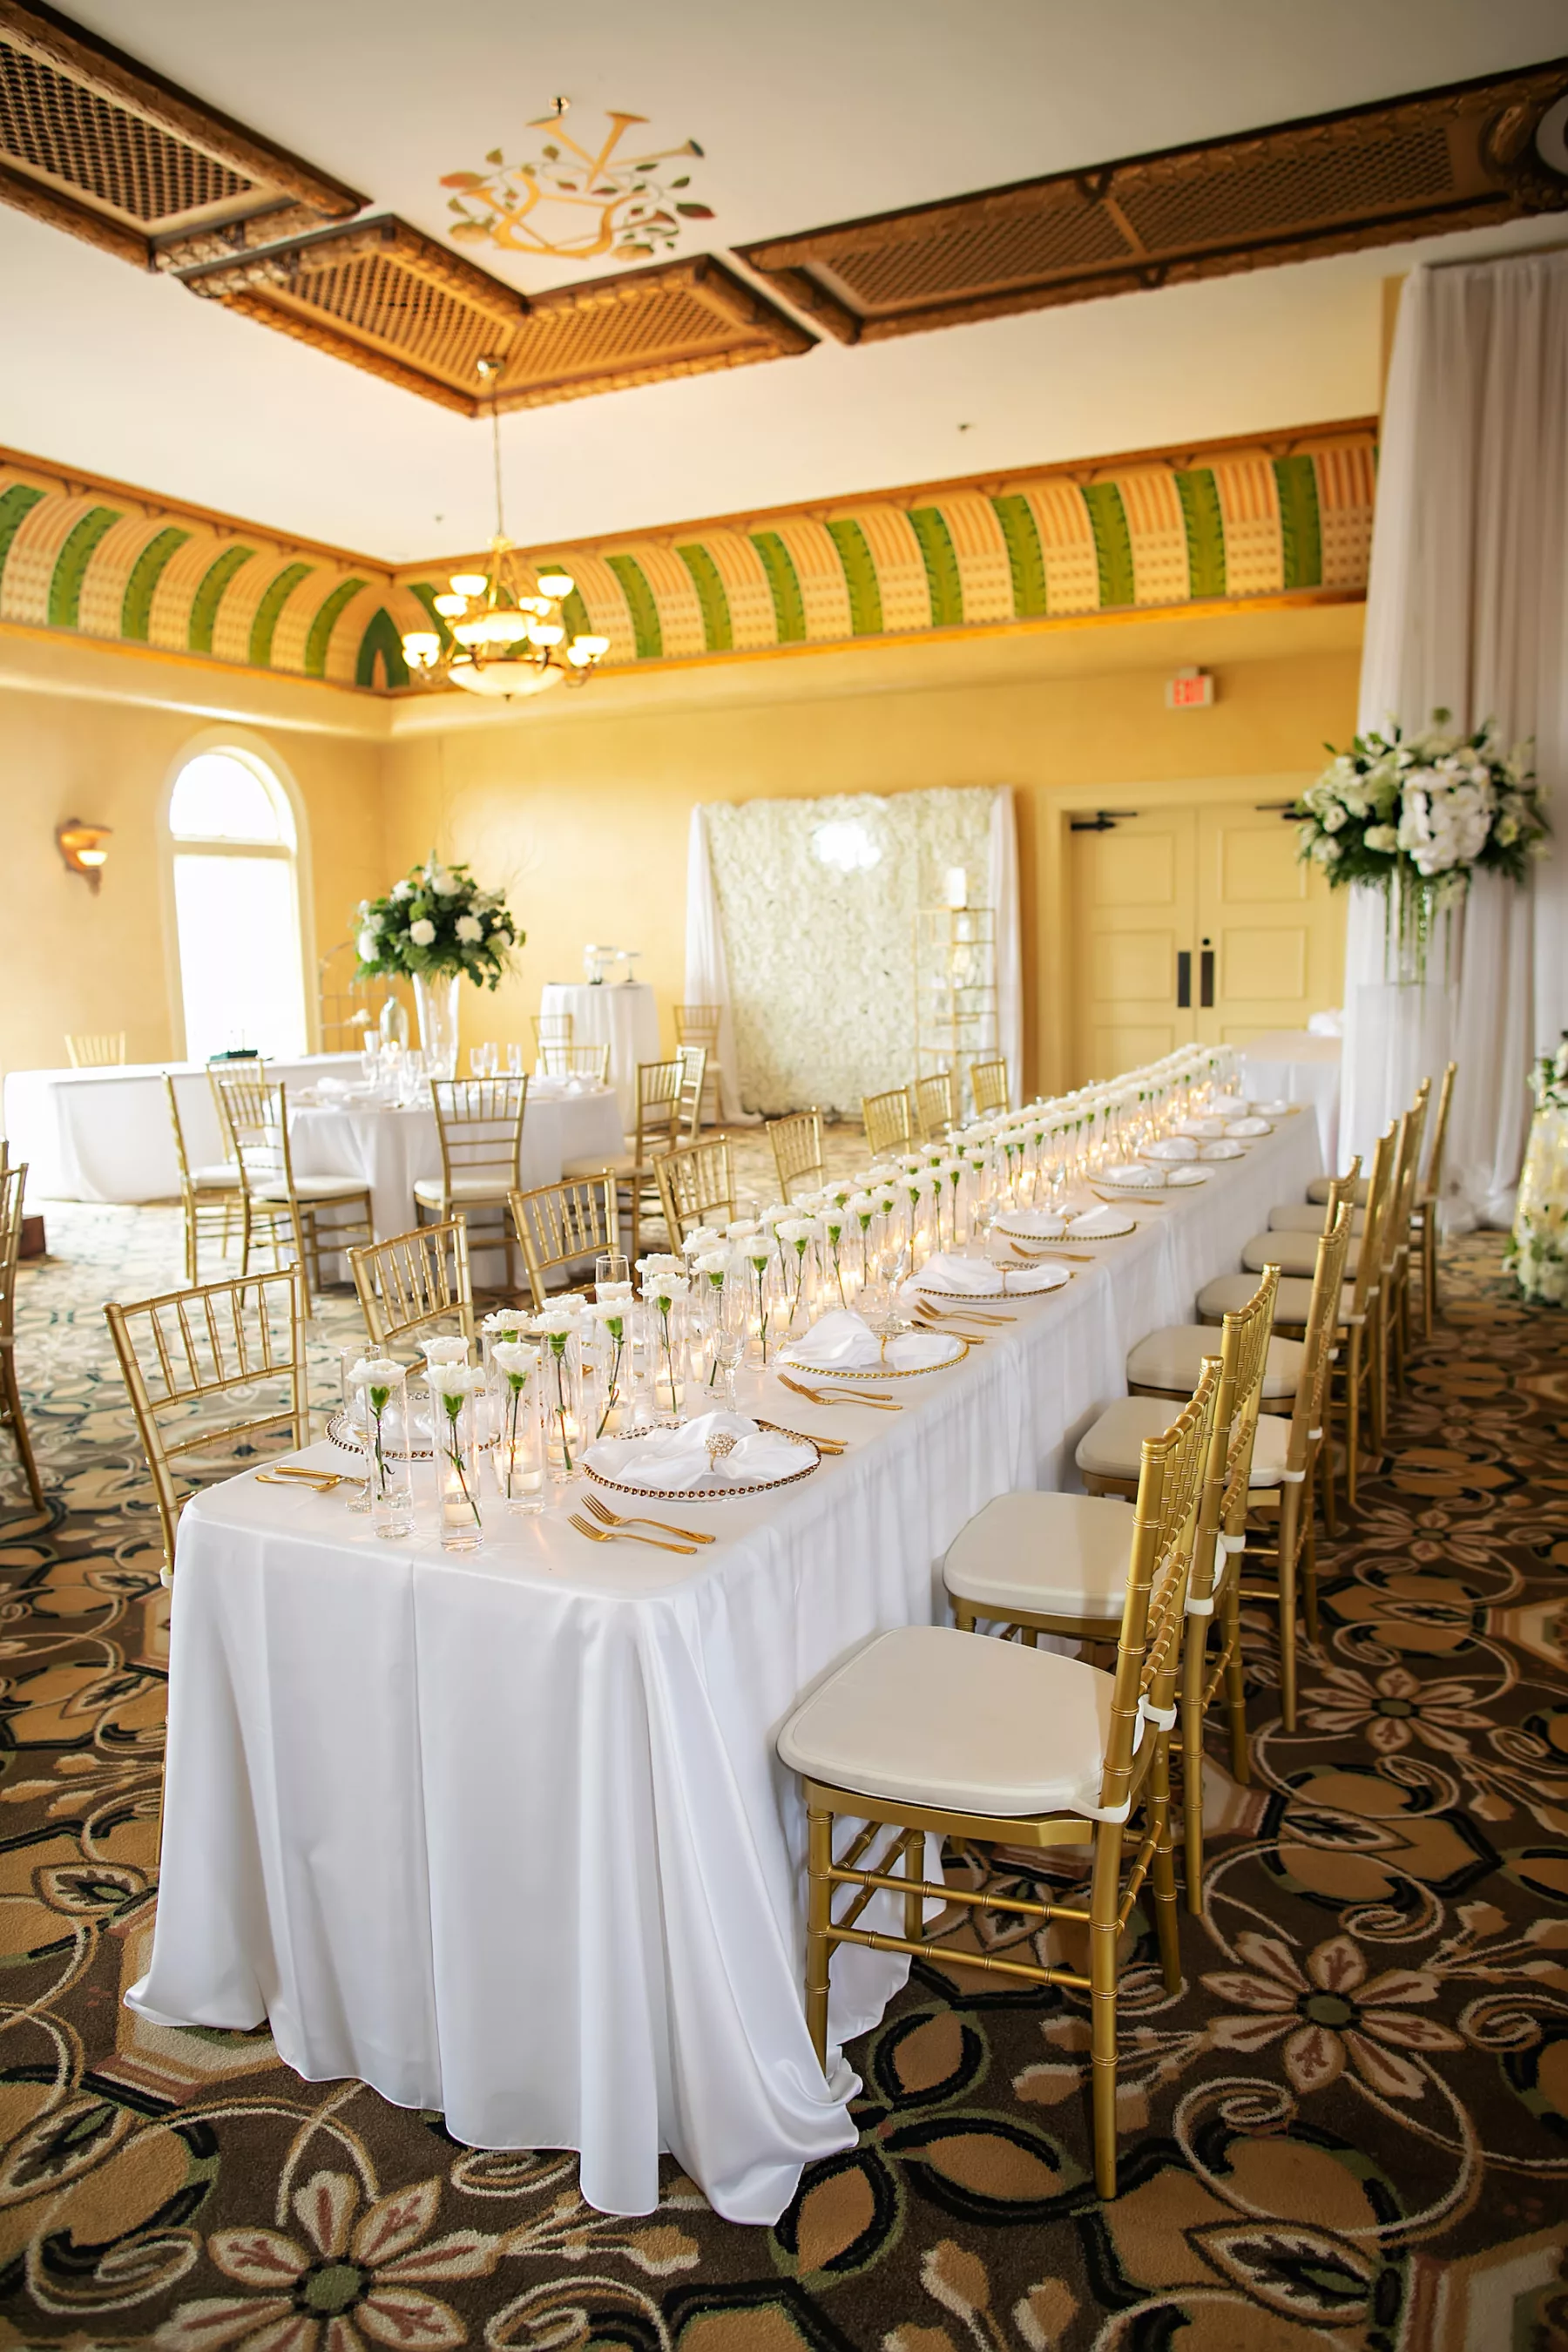 Classic White and Gold Wedding Reception Feasting Tables with Single White Carnation in Glass Vase Centerpiece Inspiration